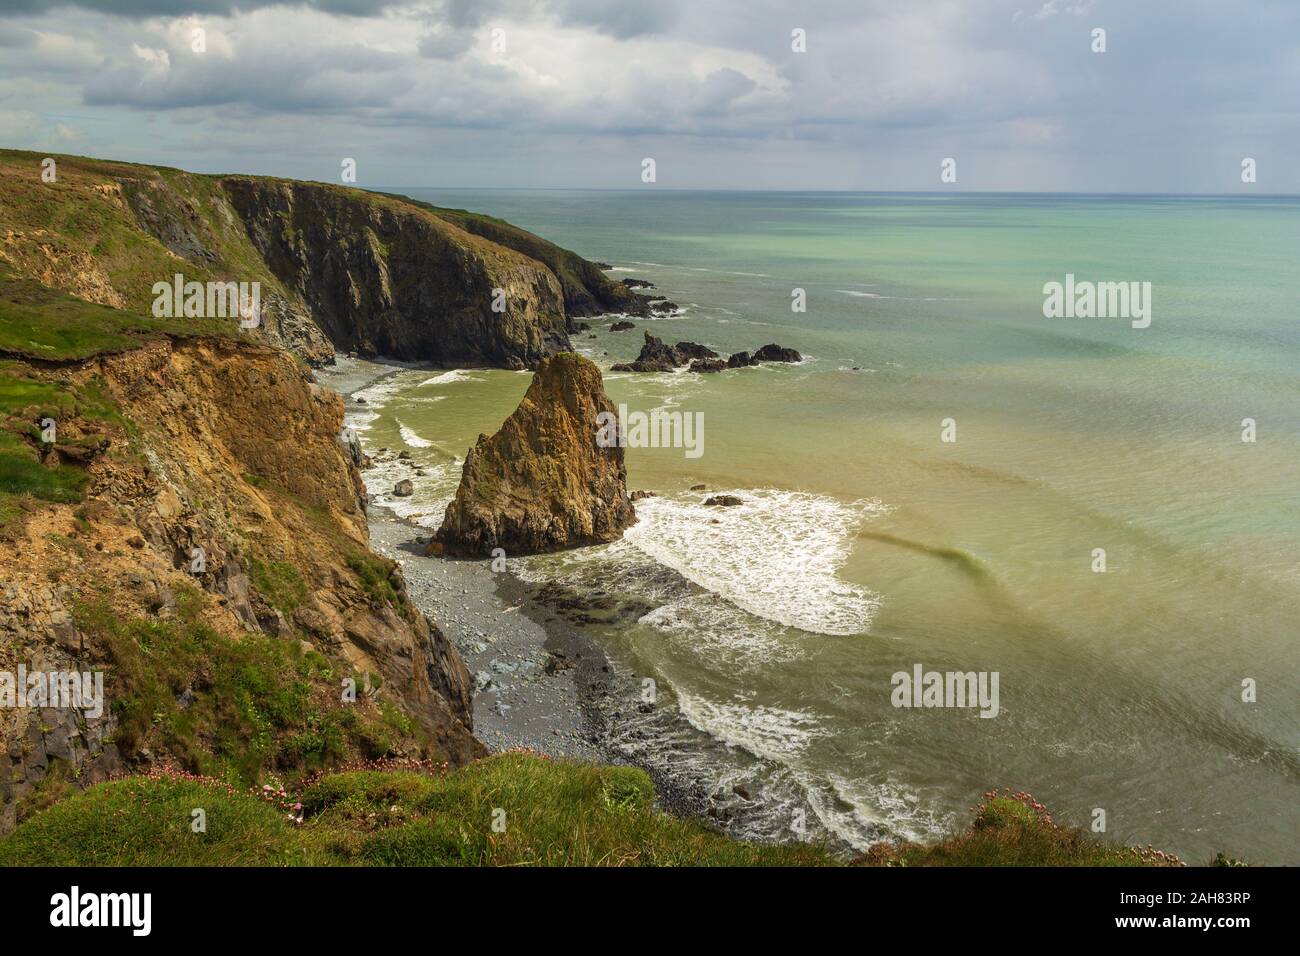 The beautiful cliffy shoreline of Copper Coast in County Waterford, Ireland. Stock Photo